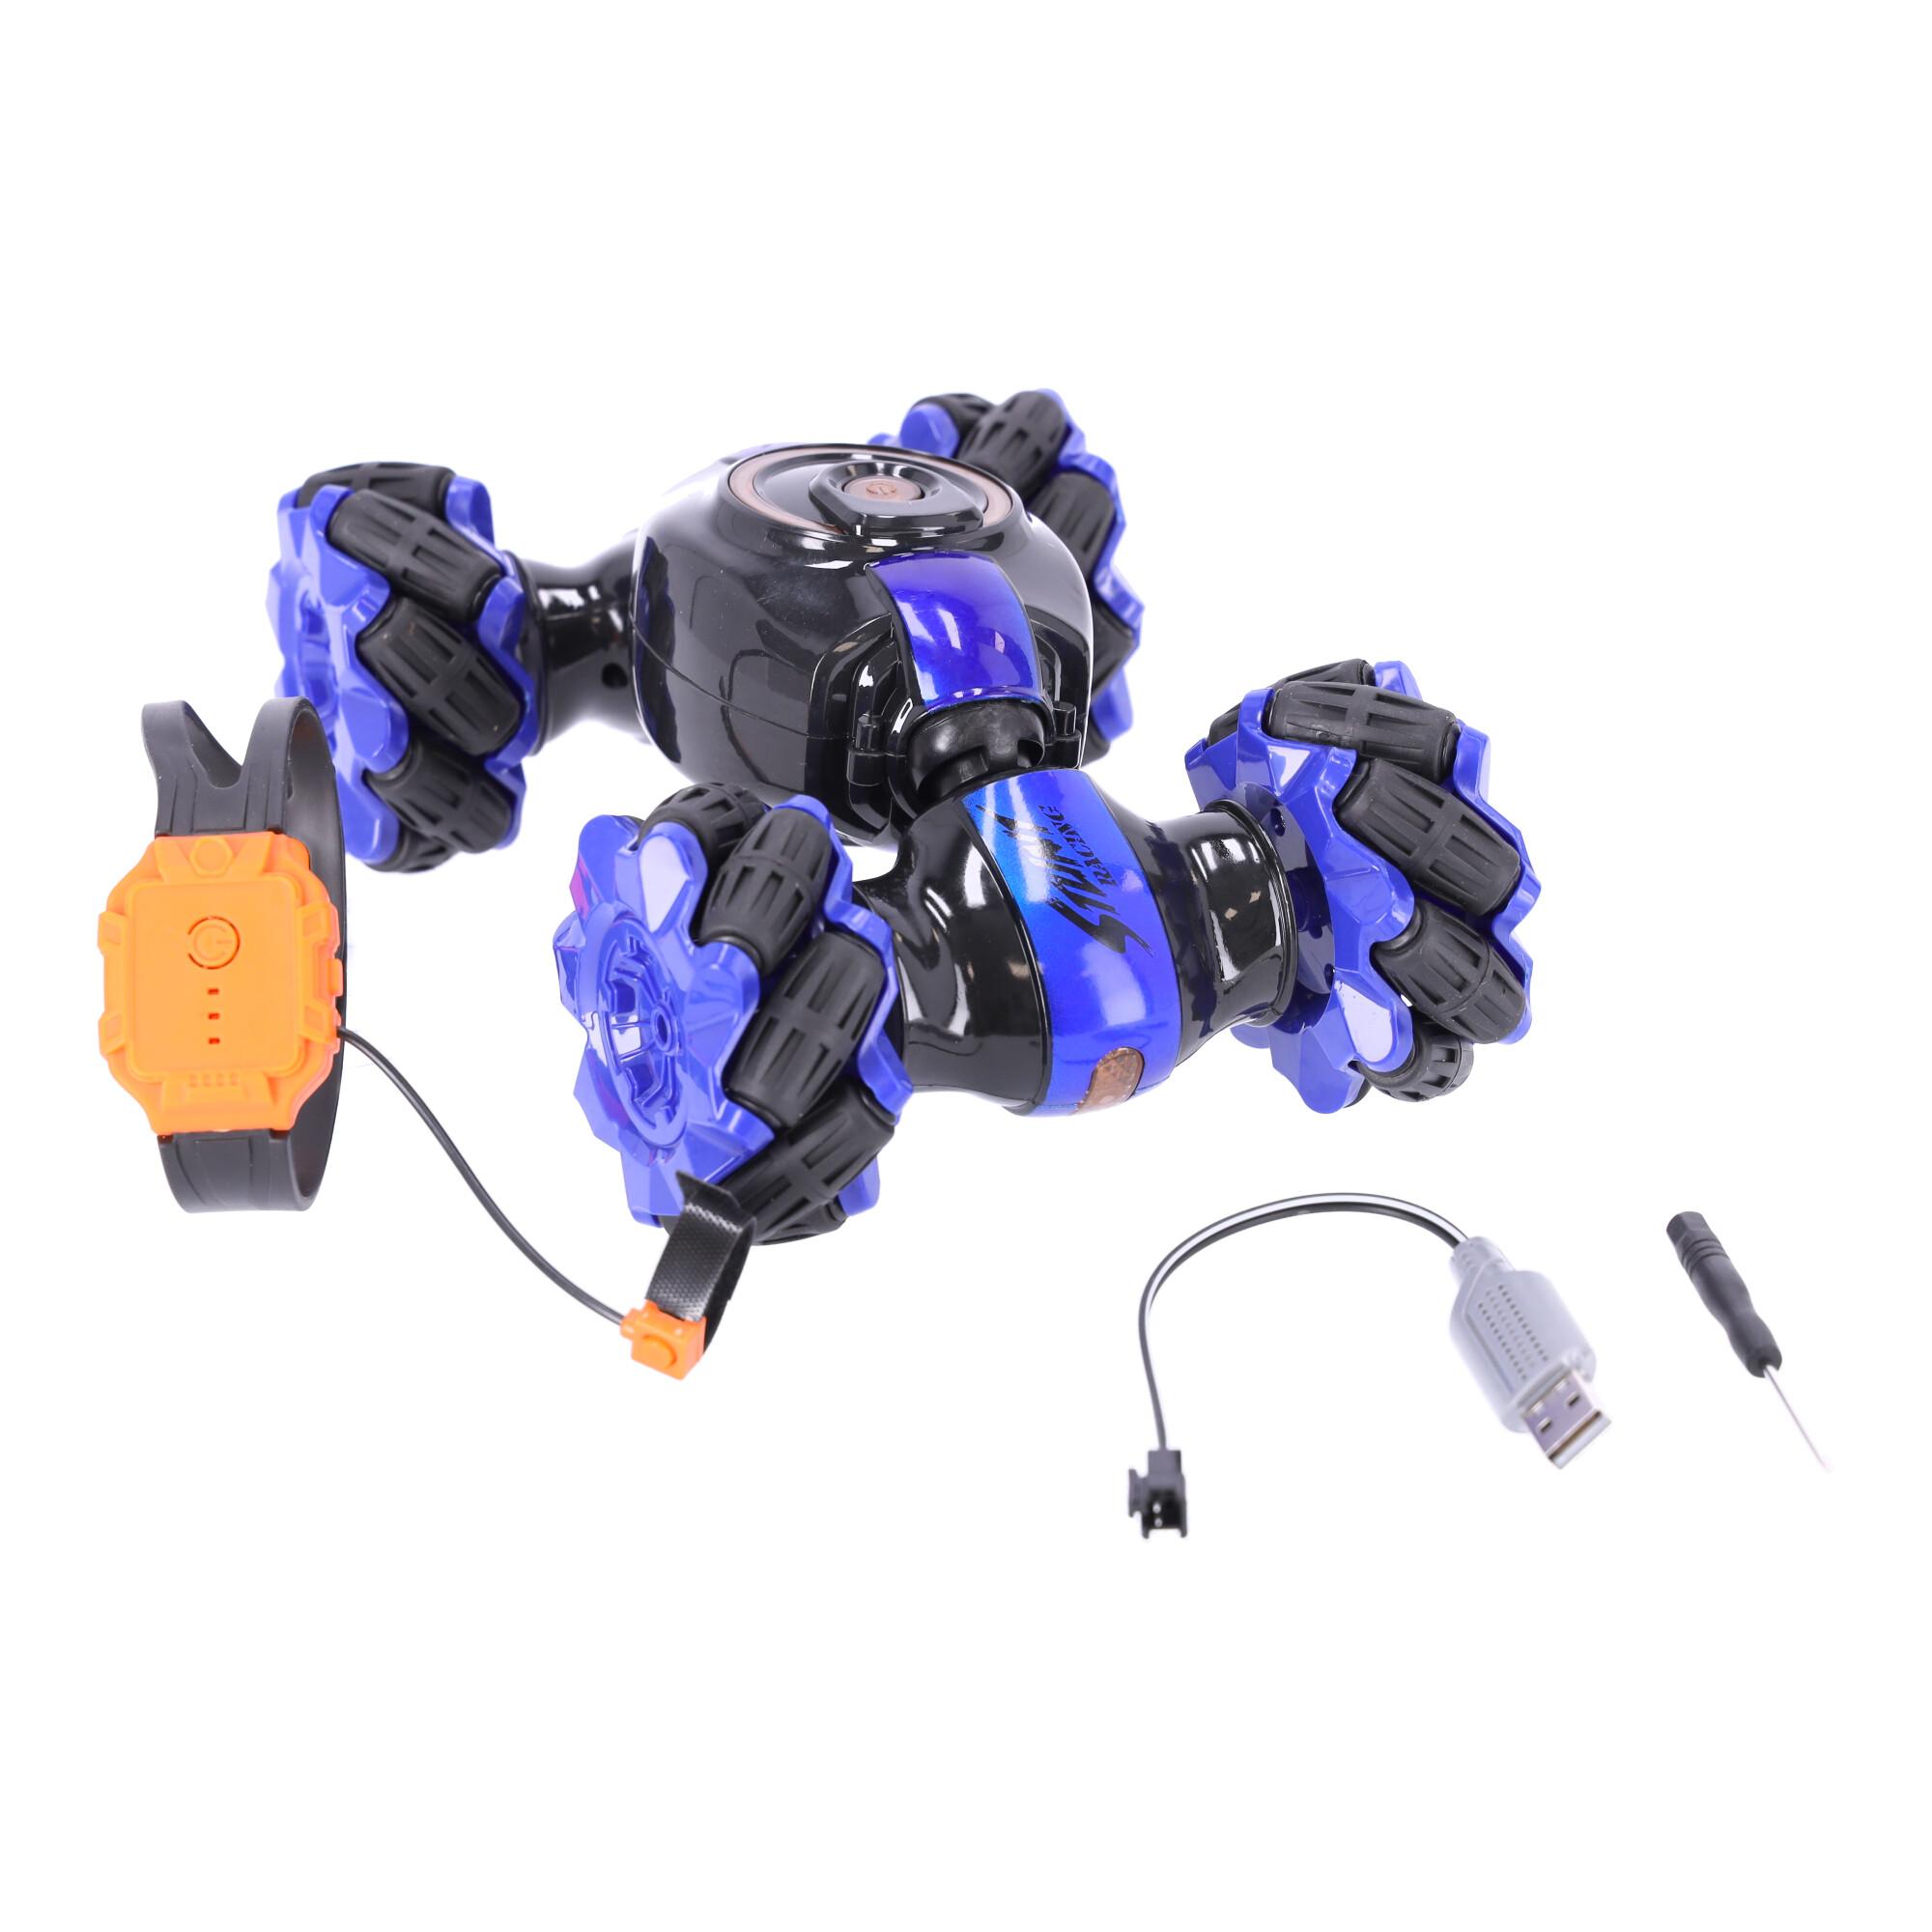 Remote controlled car with gestures, controller, remote control - blue